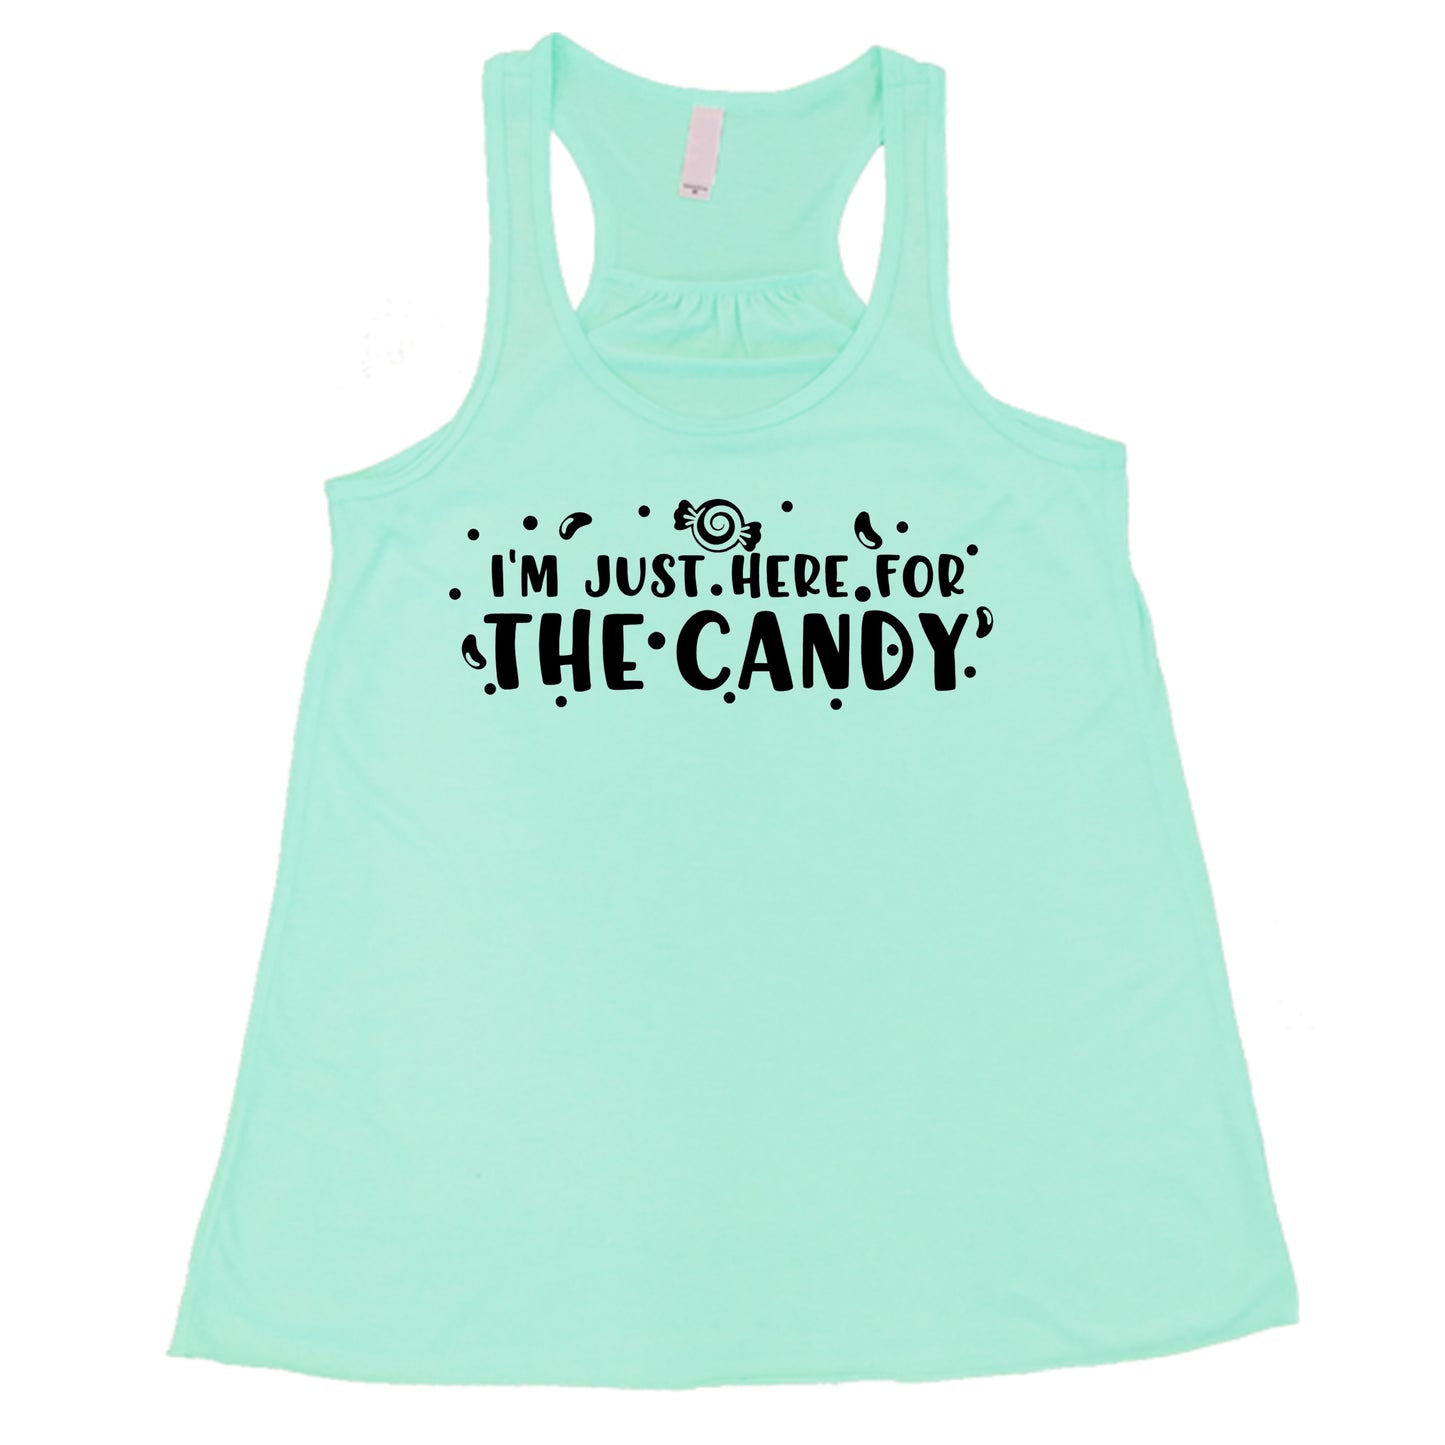 I'm Just Here for The Candy Shirt